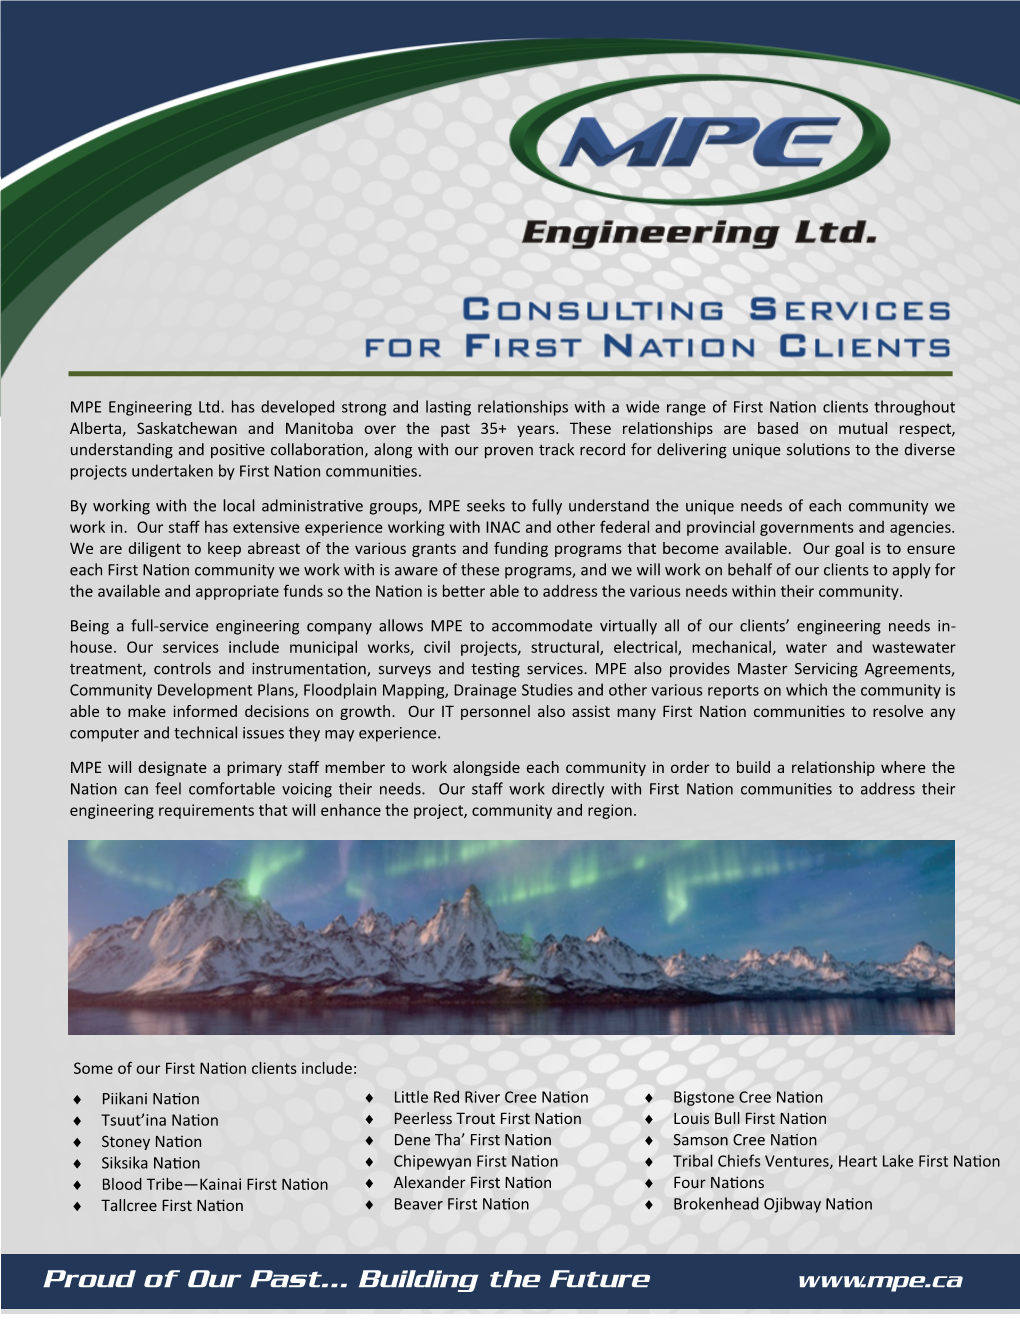 MPE Engineering Ltd. Has Developed Strong and Lasting Relationships with a Wide Range of First Nation Clients Throughout Alberta